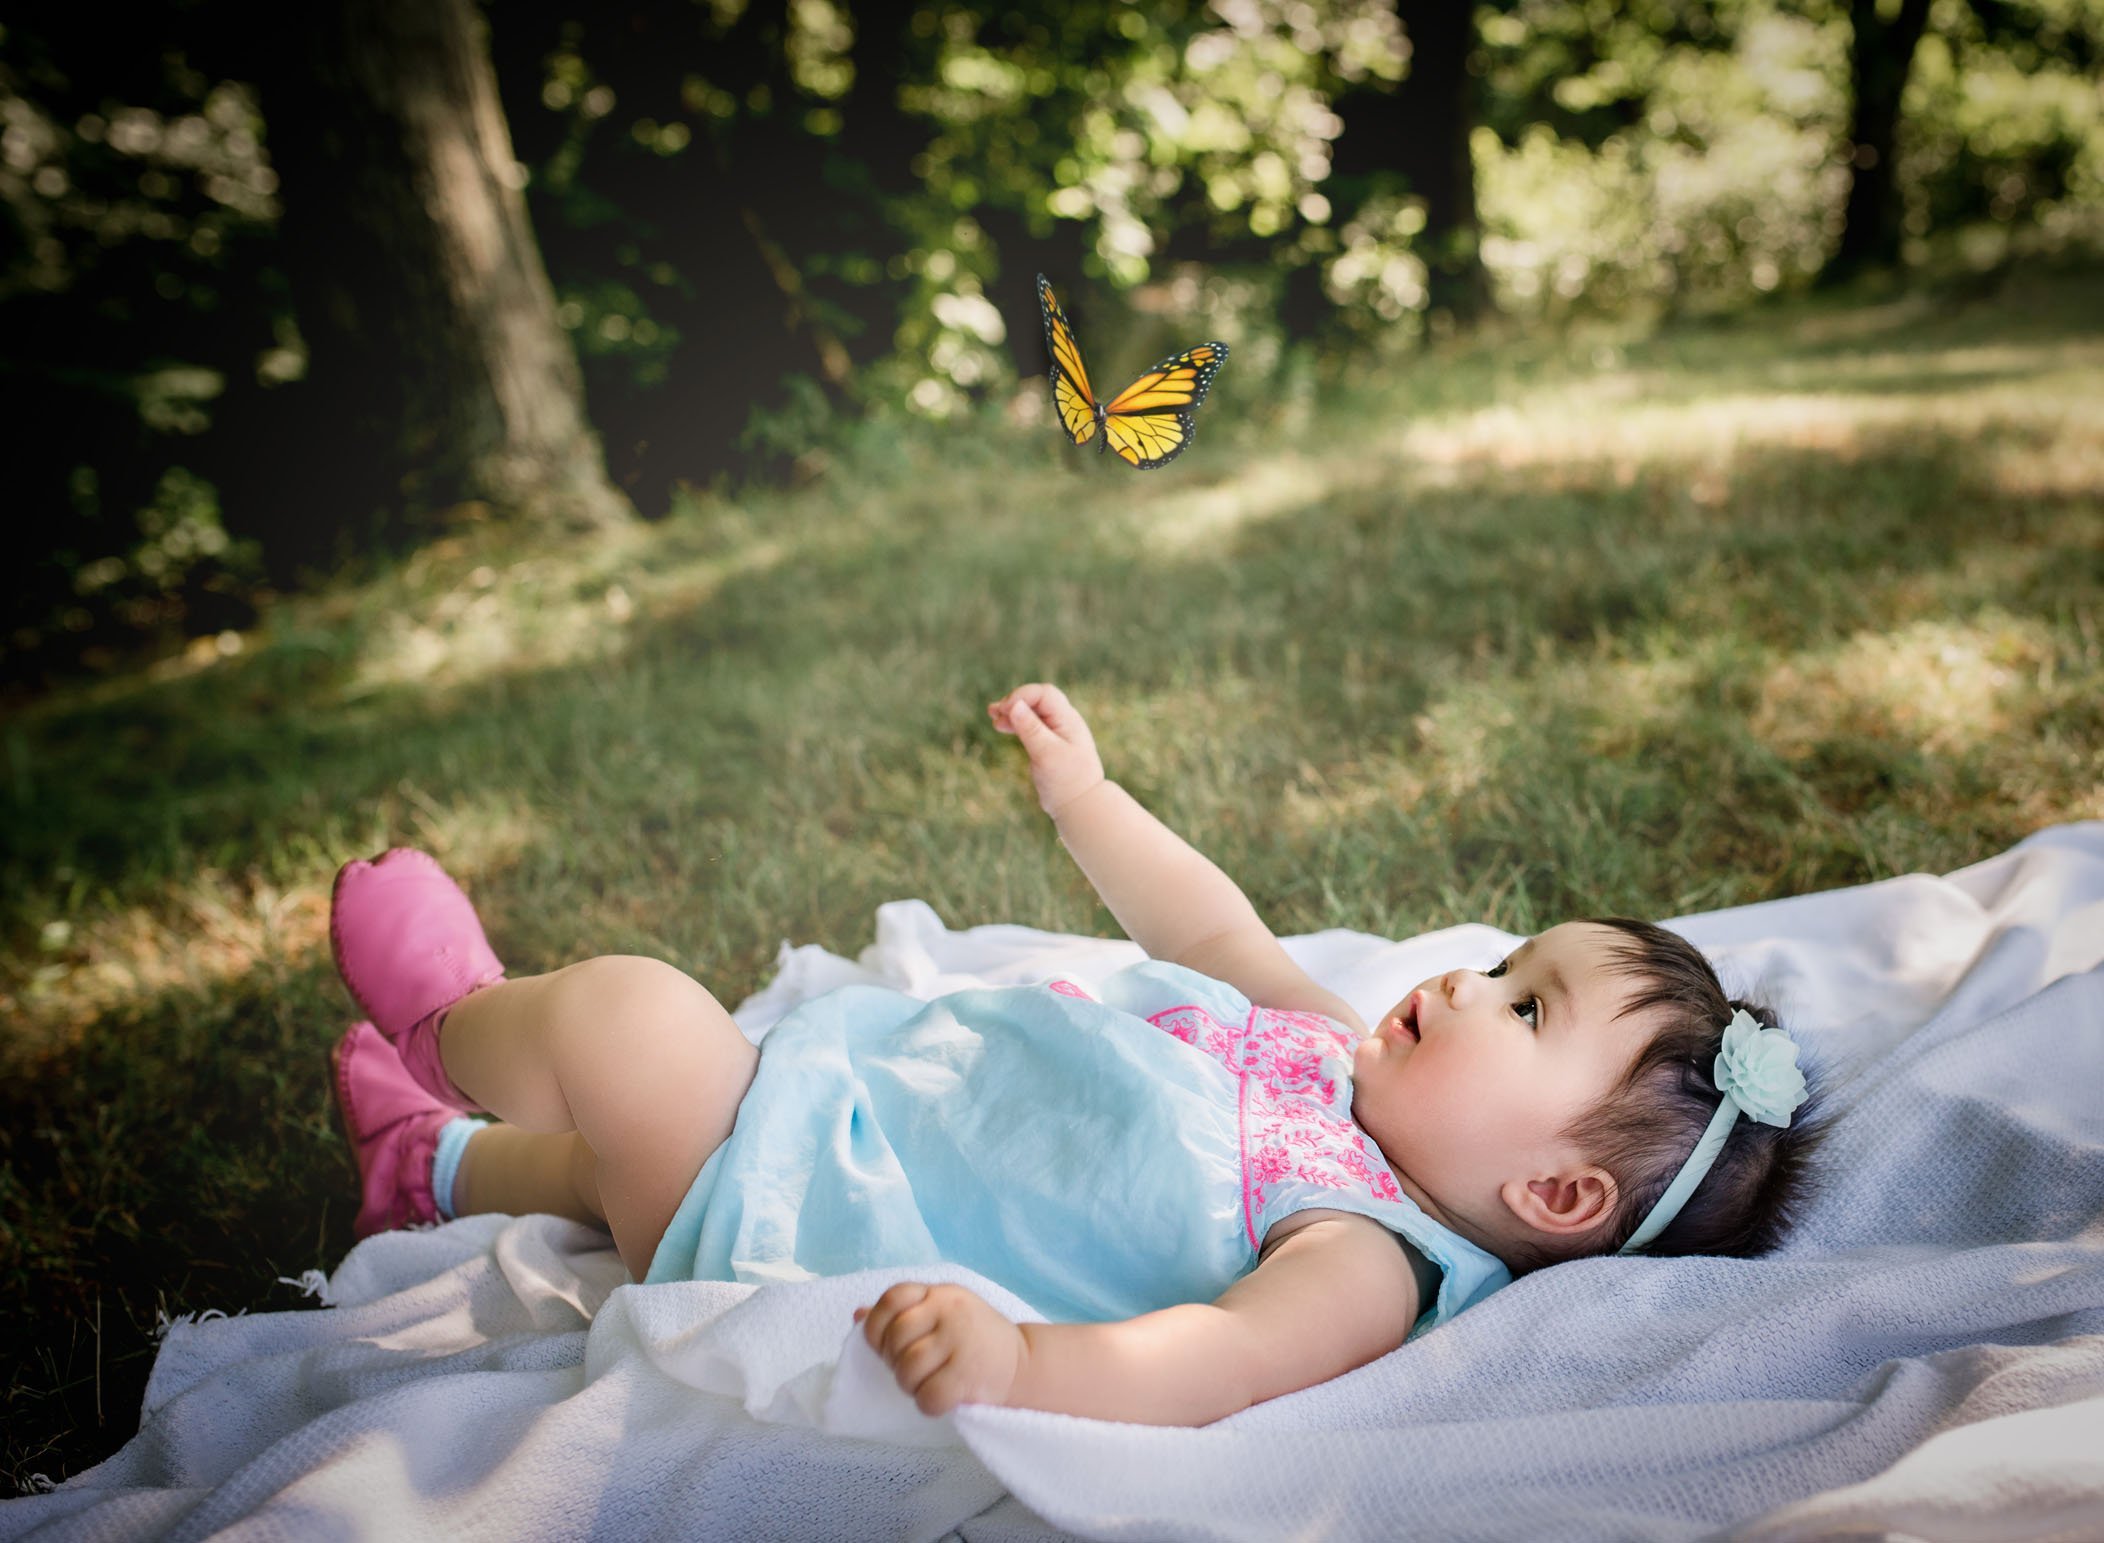 6 month old baby girl lying on a blanket looking up at a butterfly